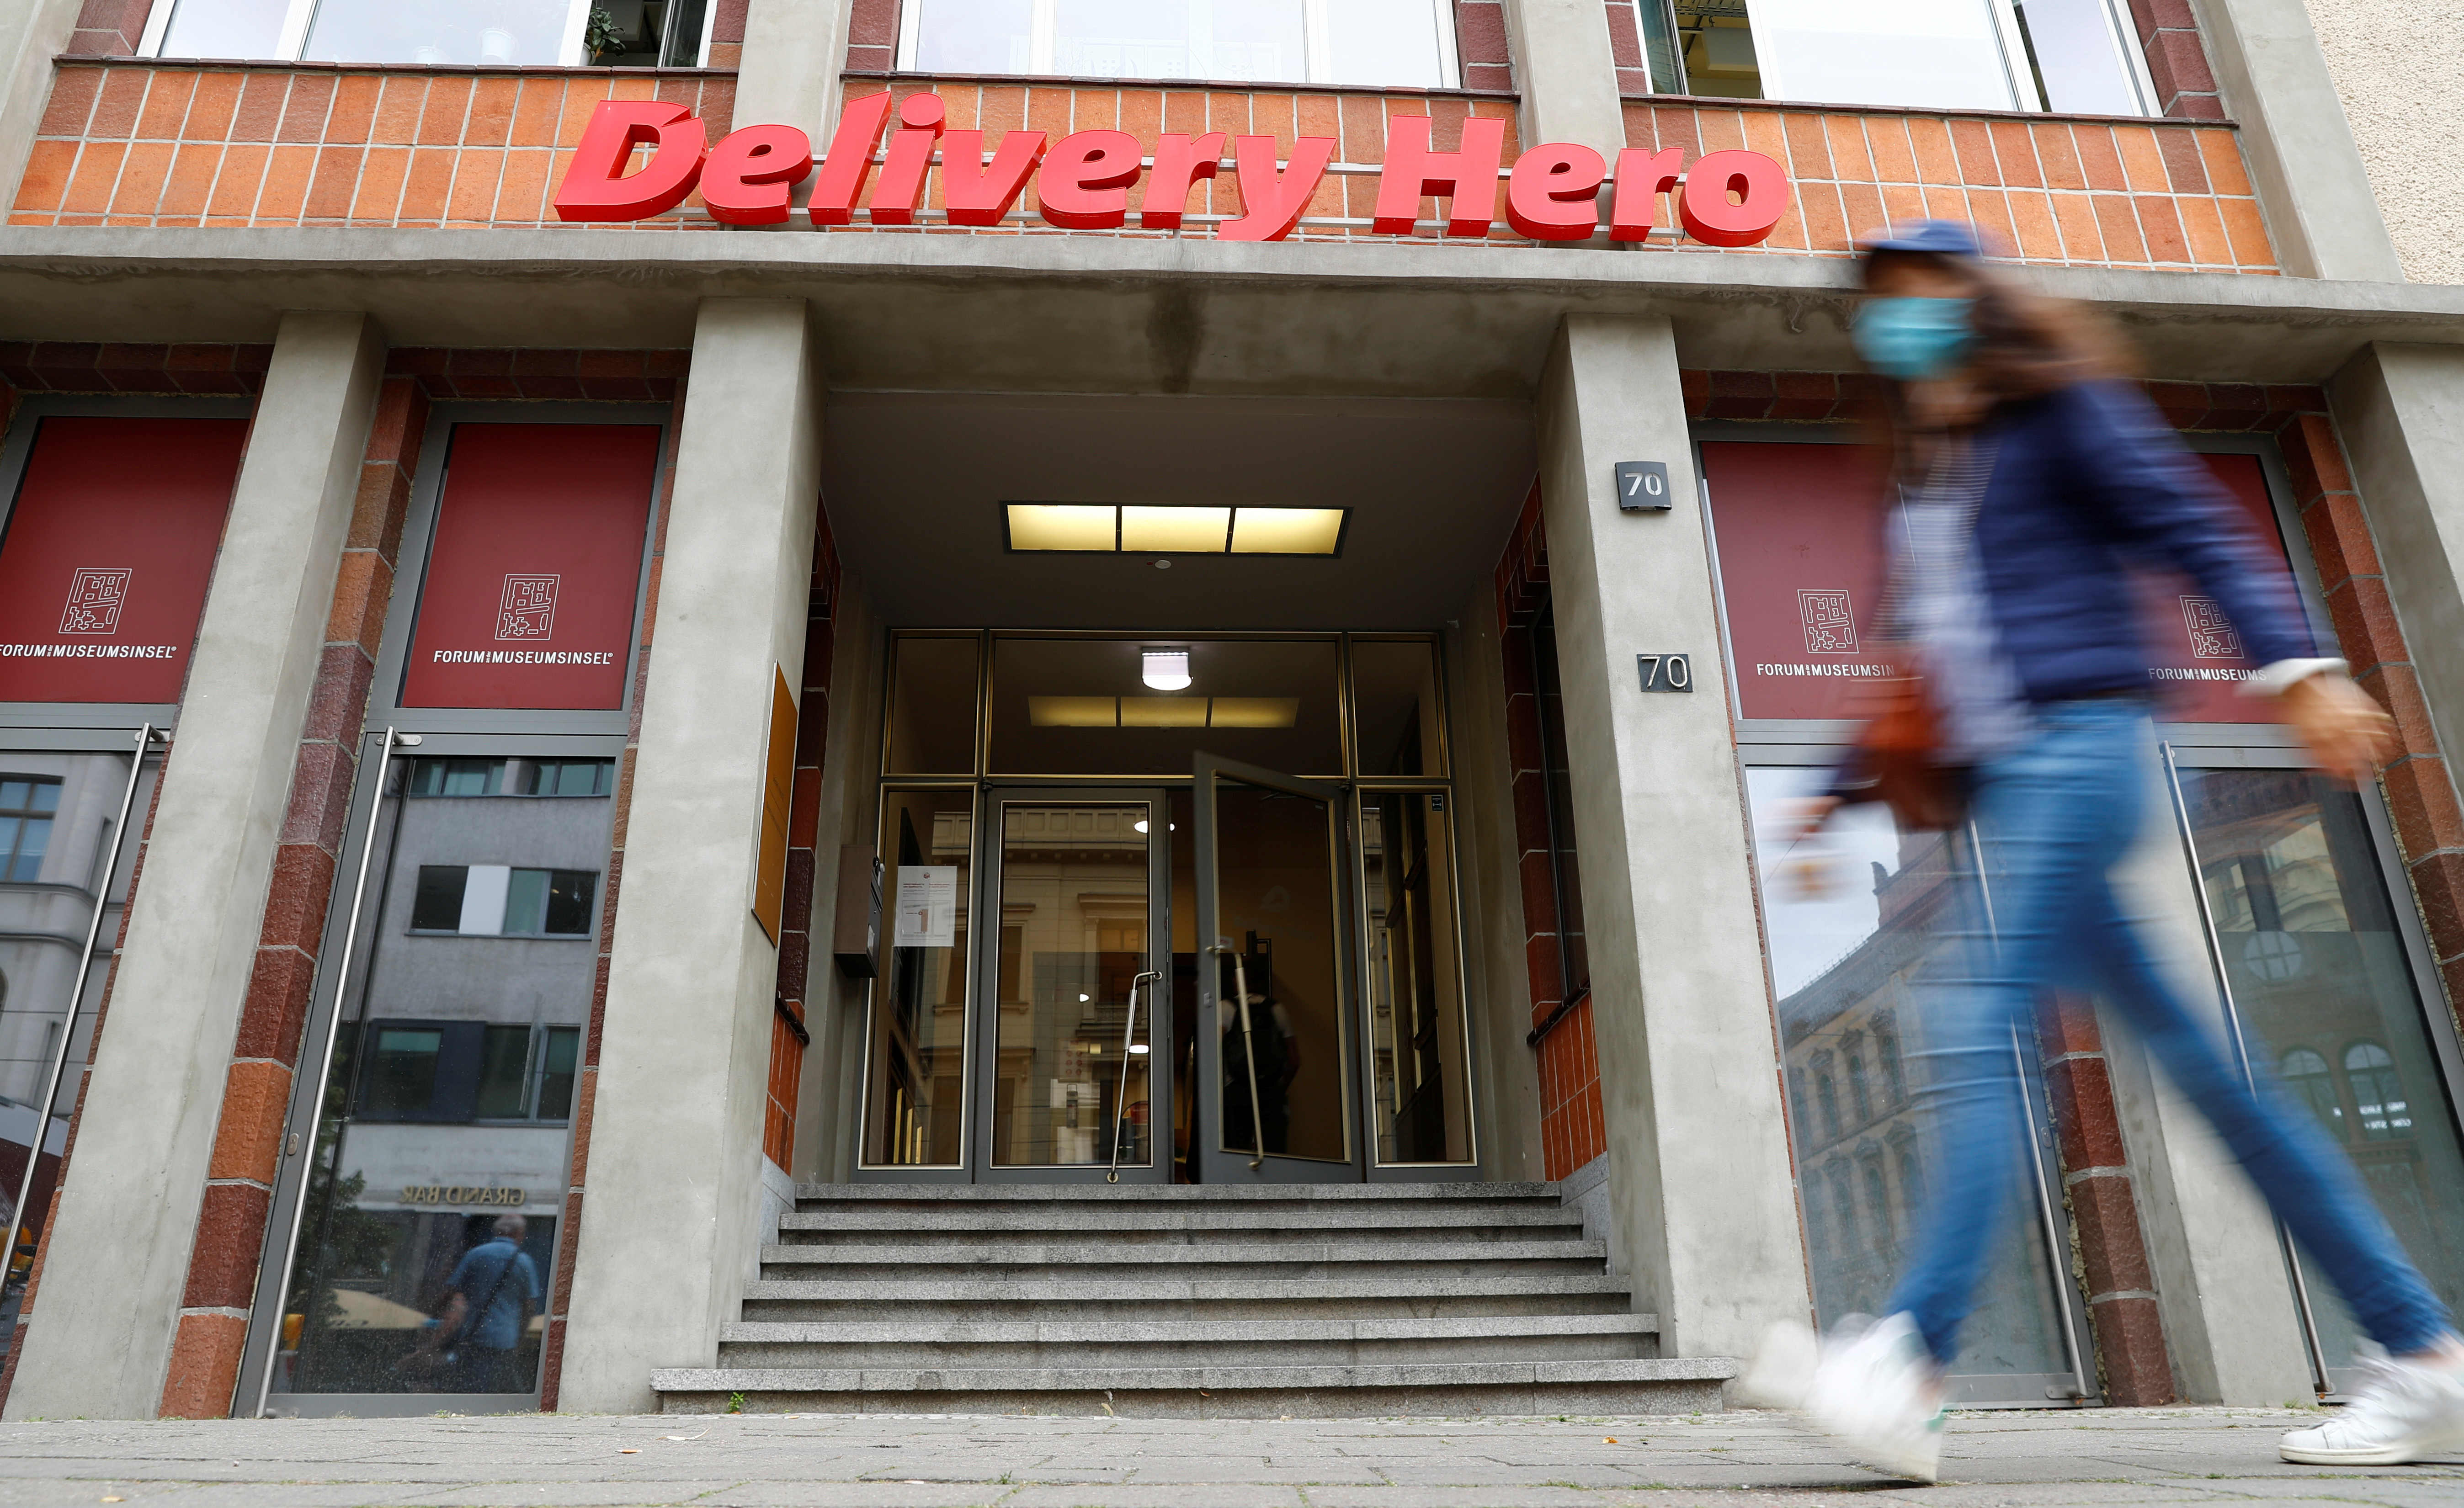 The Delivery Hero headquarters are pictured in Berlin